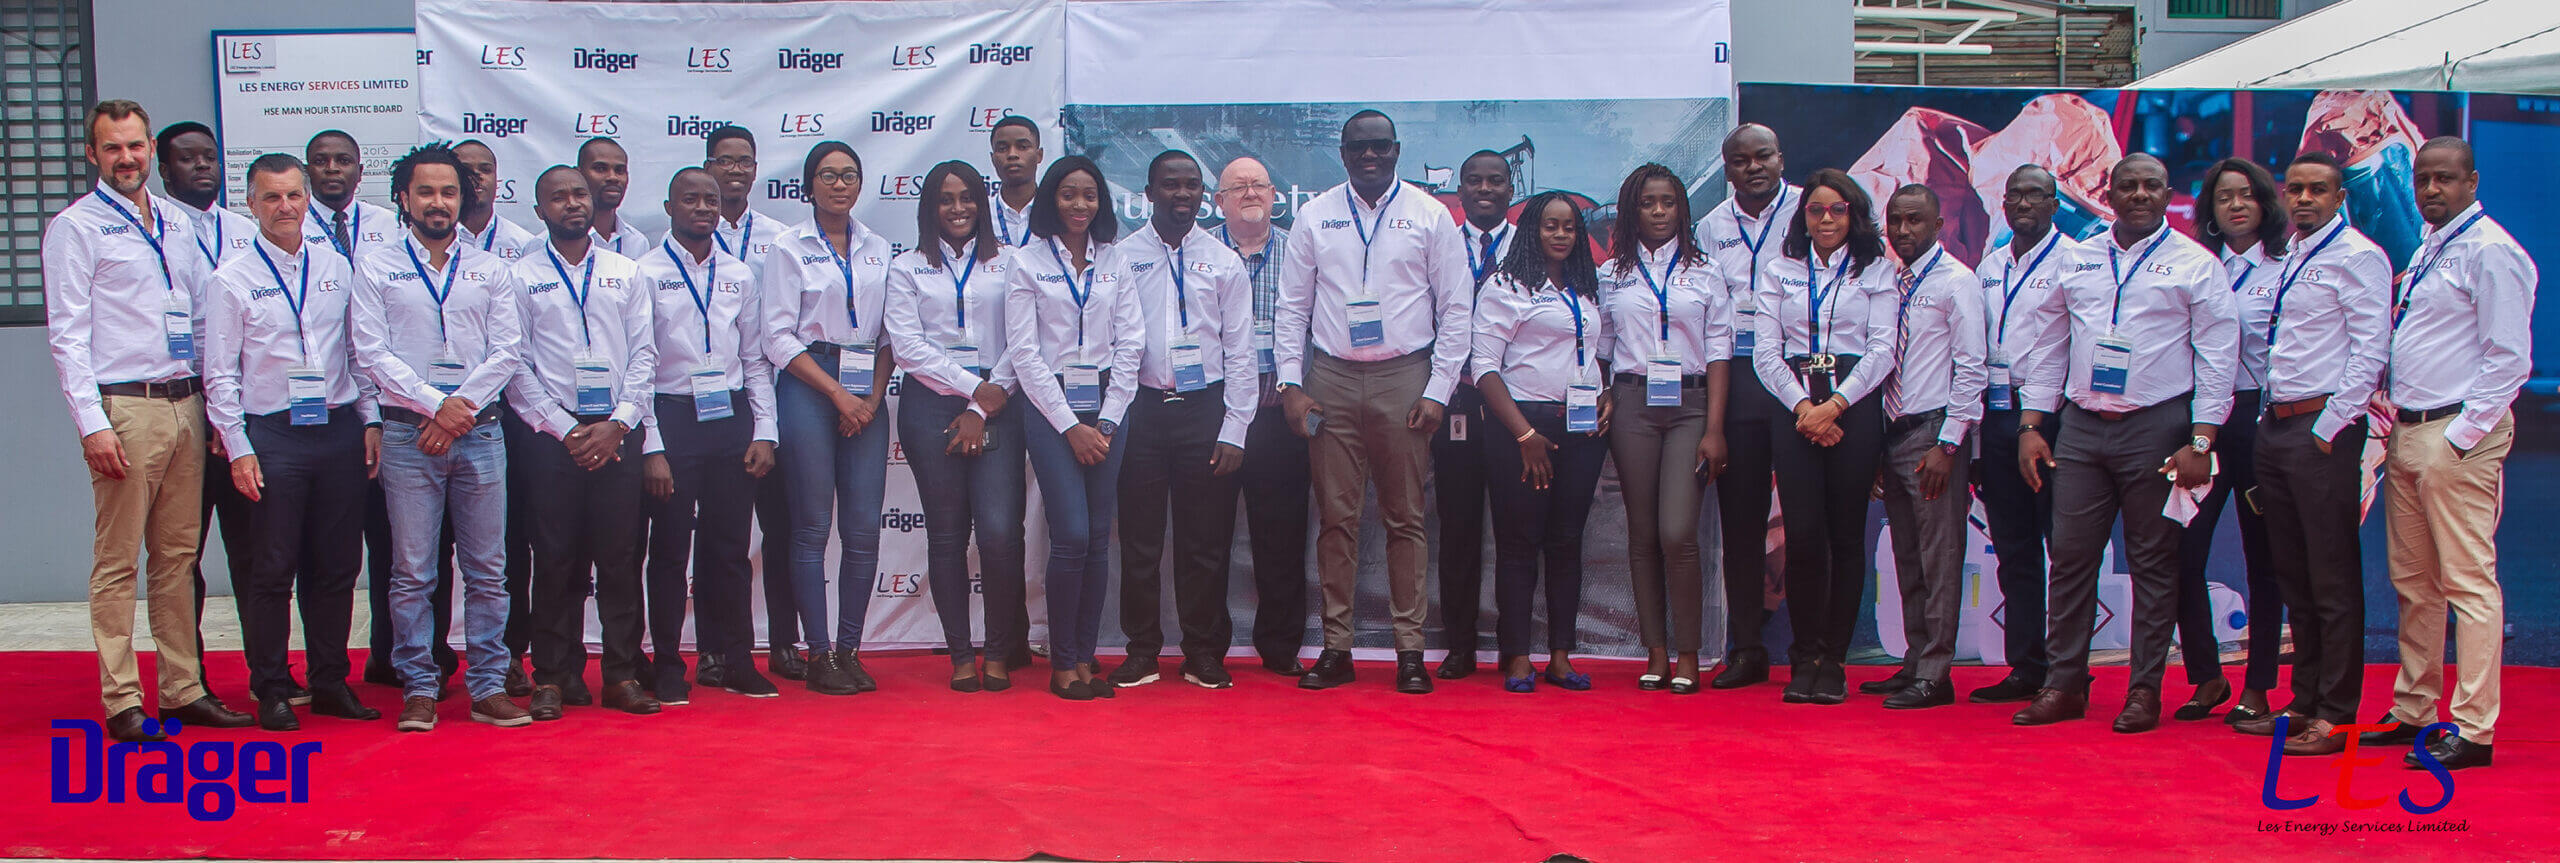 Group Picture, LES Energy Team Members and Drager Facilitators at Drager Day Nigeria